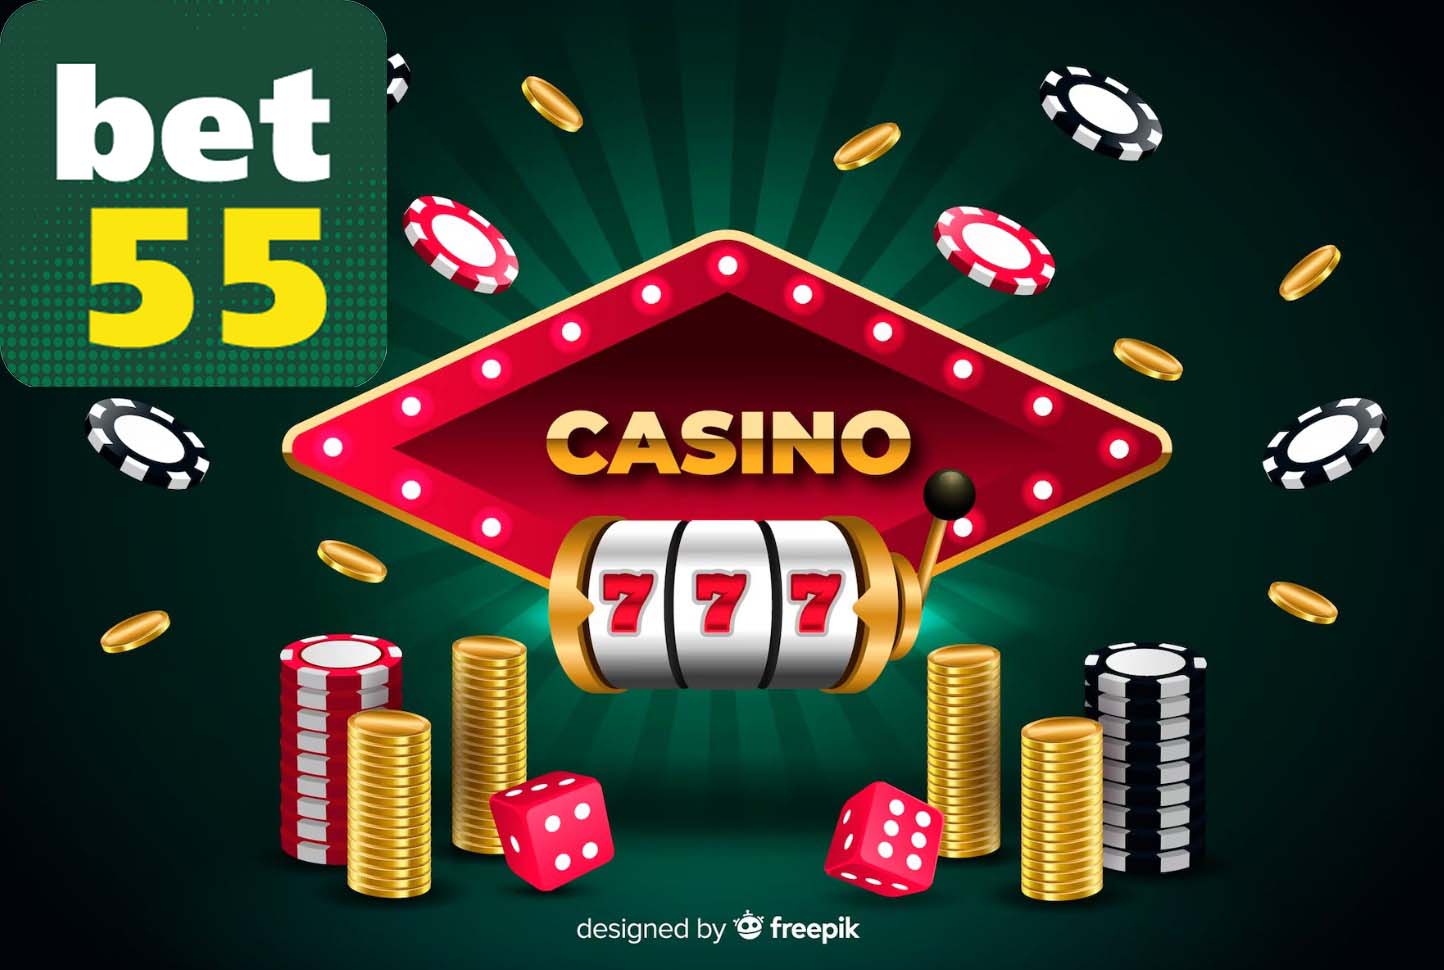 How To Find The Time To Bookmaker Mostbet and online casino in Kazakhstan On Twitter in 2021